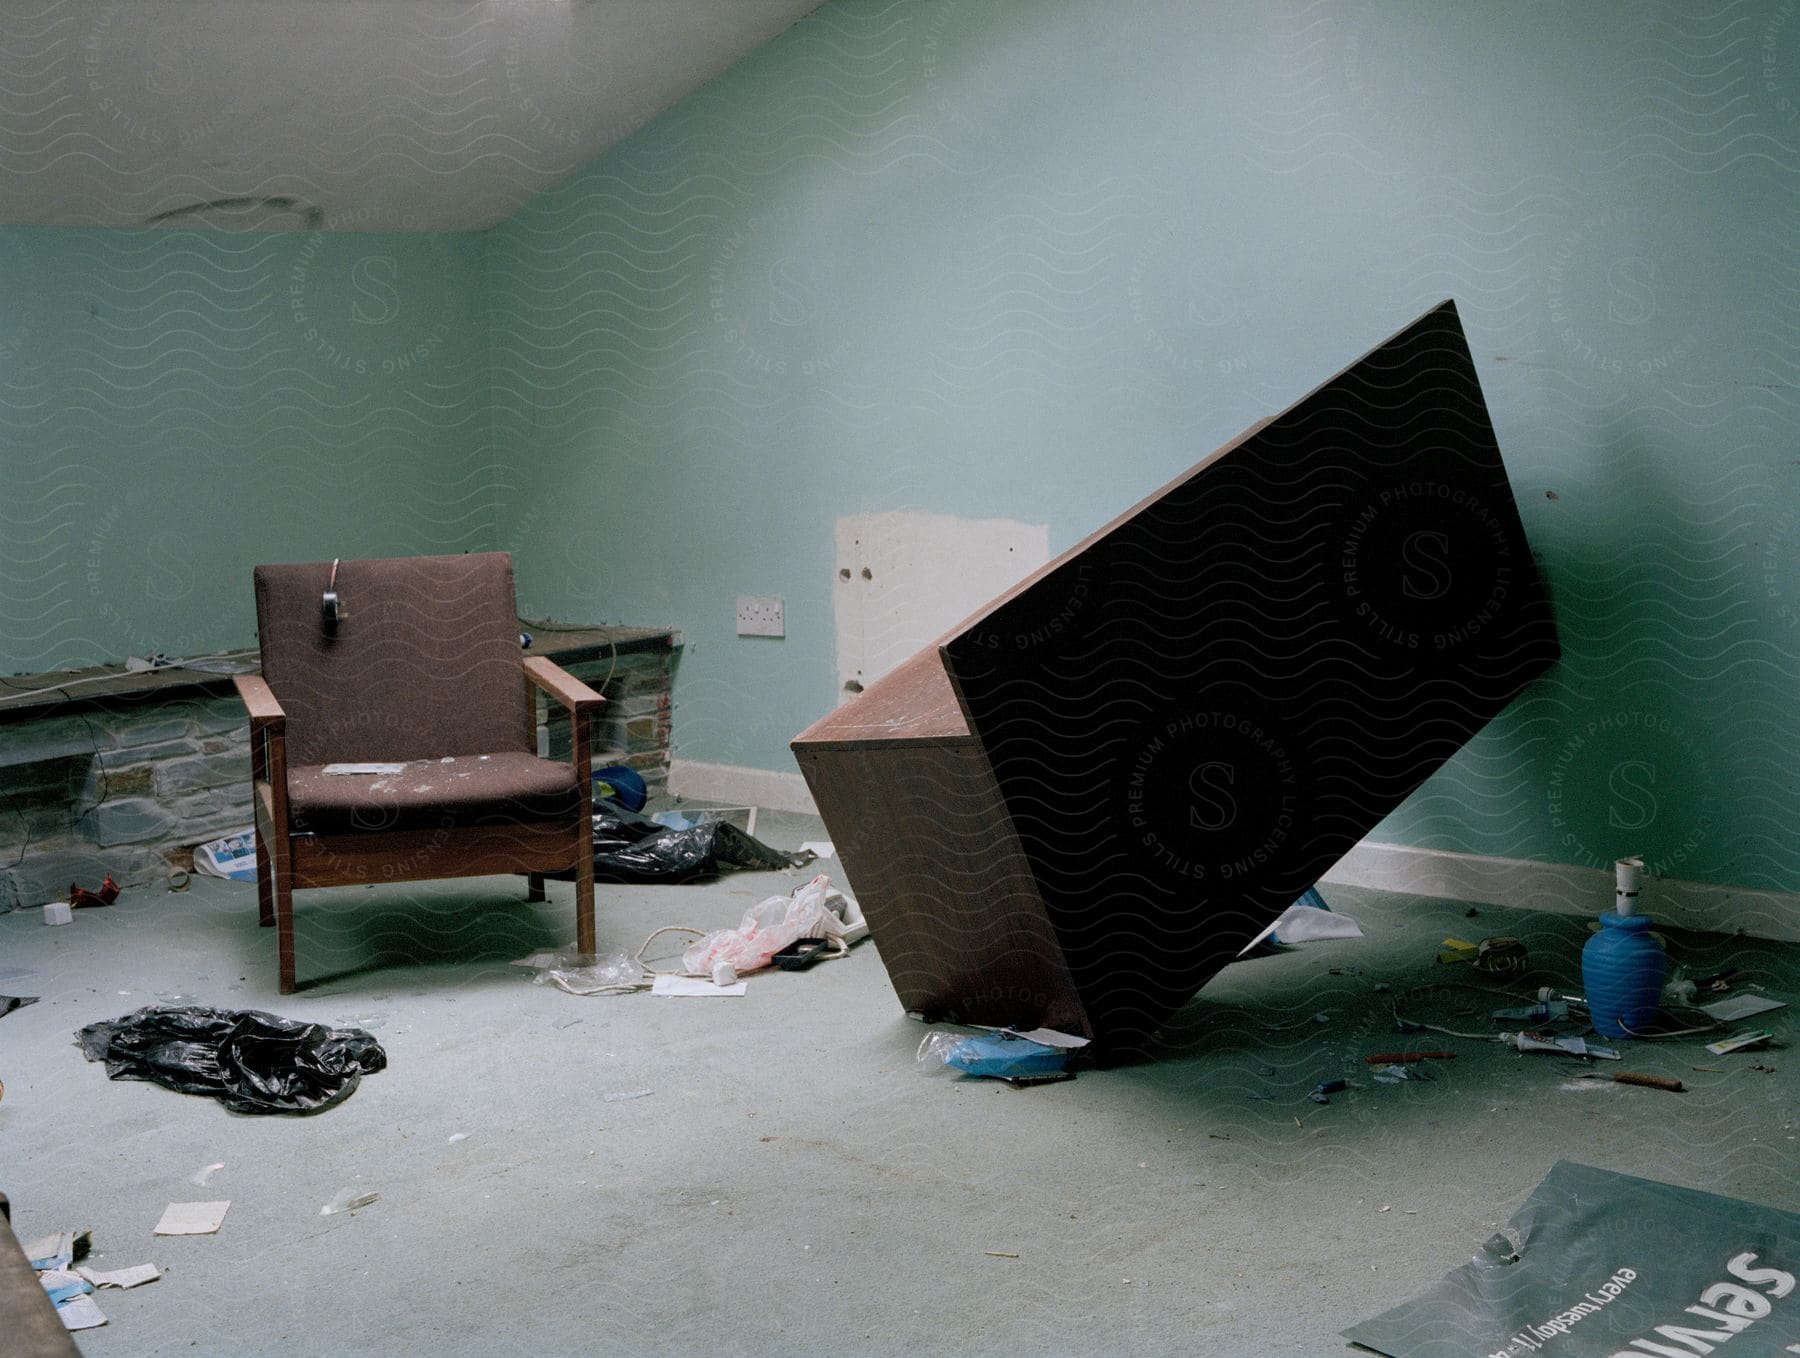 A chaotic scene of broken furniture and trash inside an abandoned house